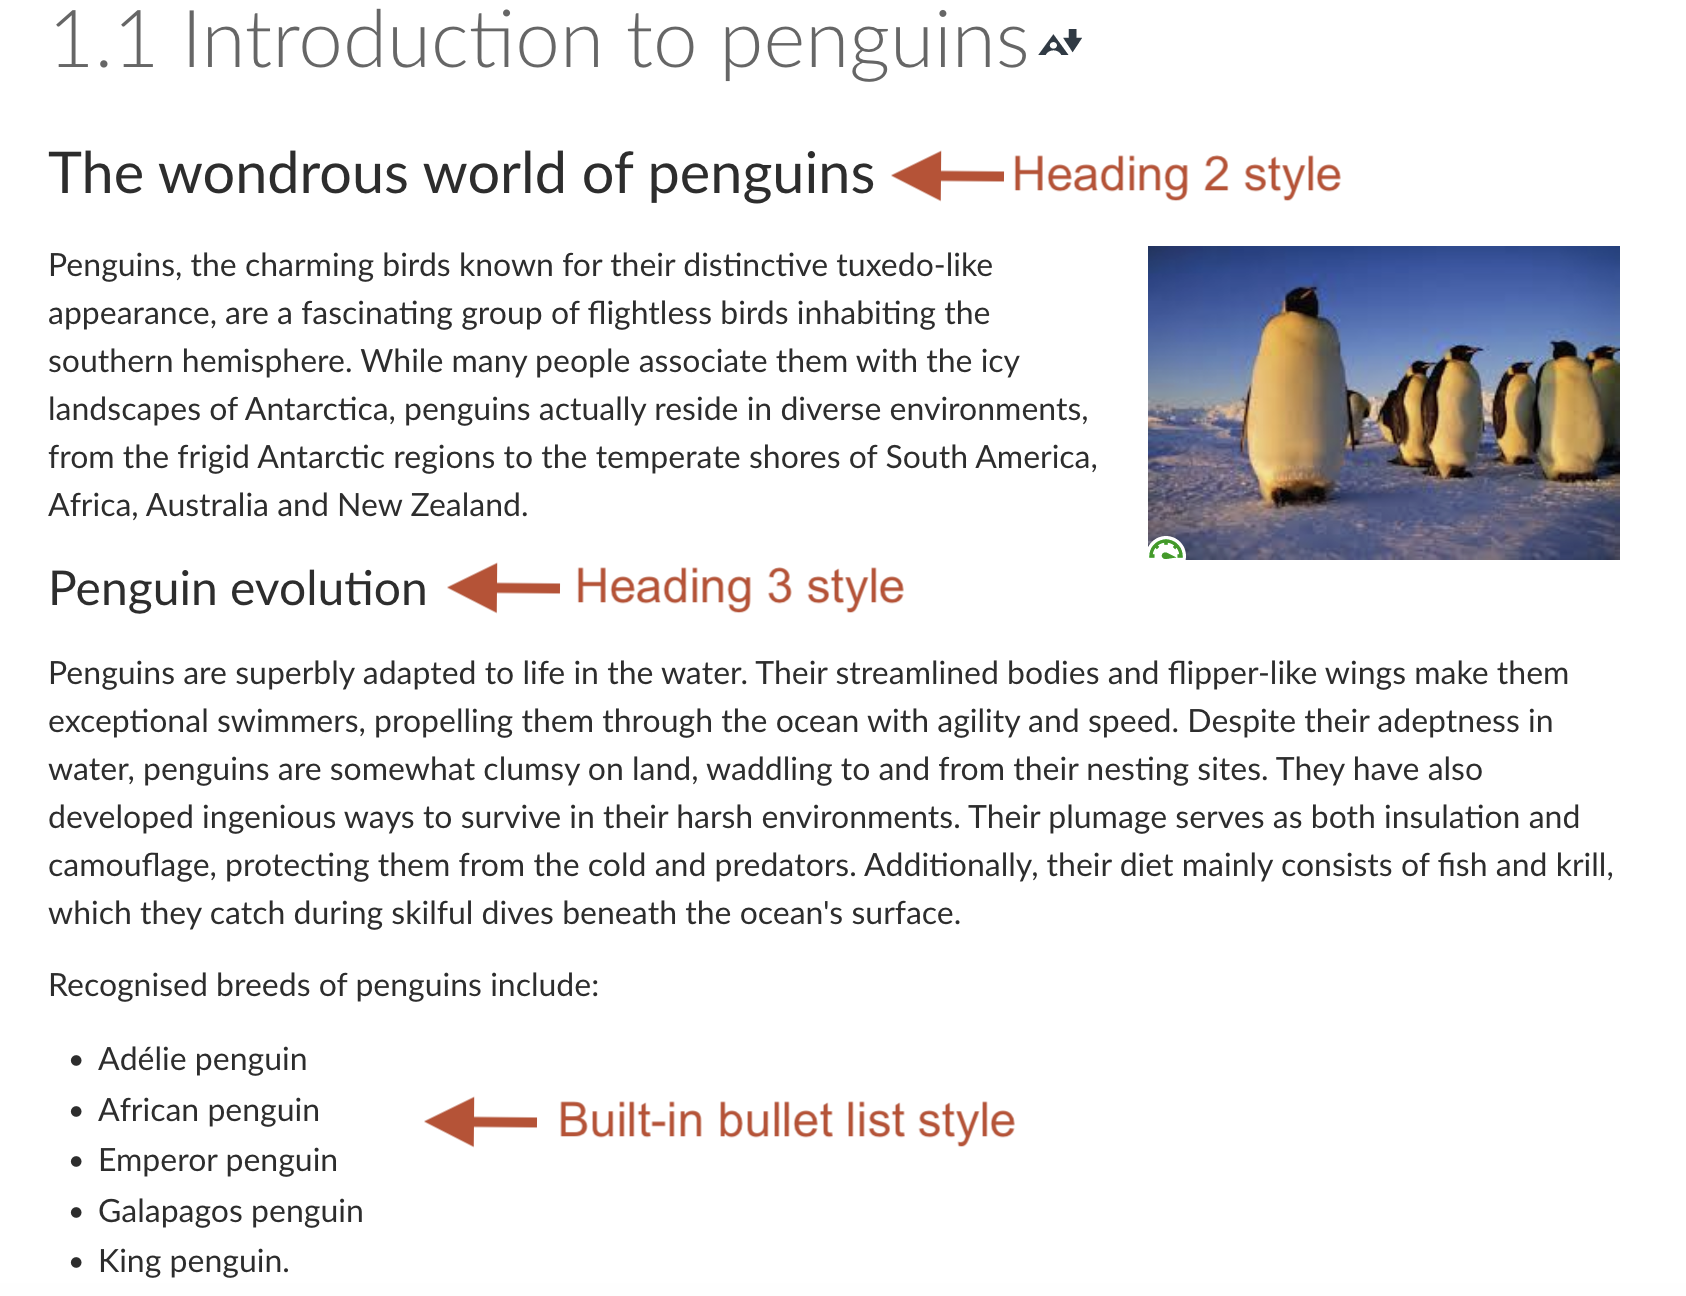 A LMS page about penguins using the built-in Heading 2, Heading 3, and bullet list styles.